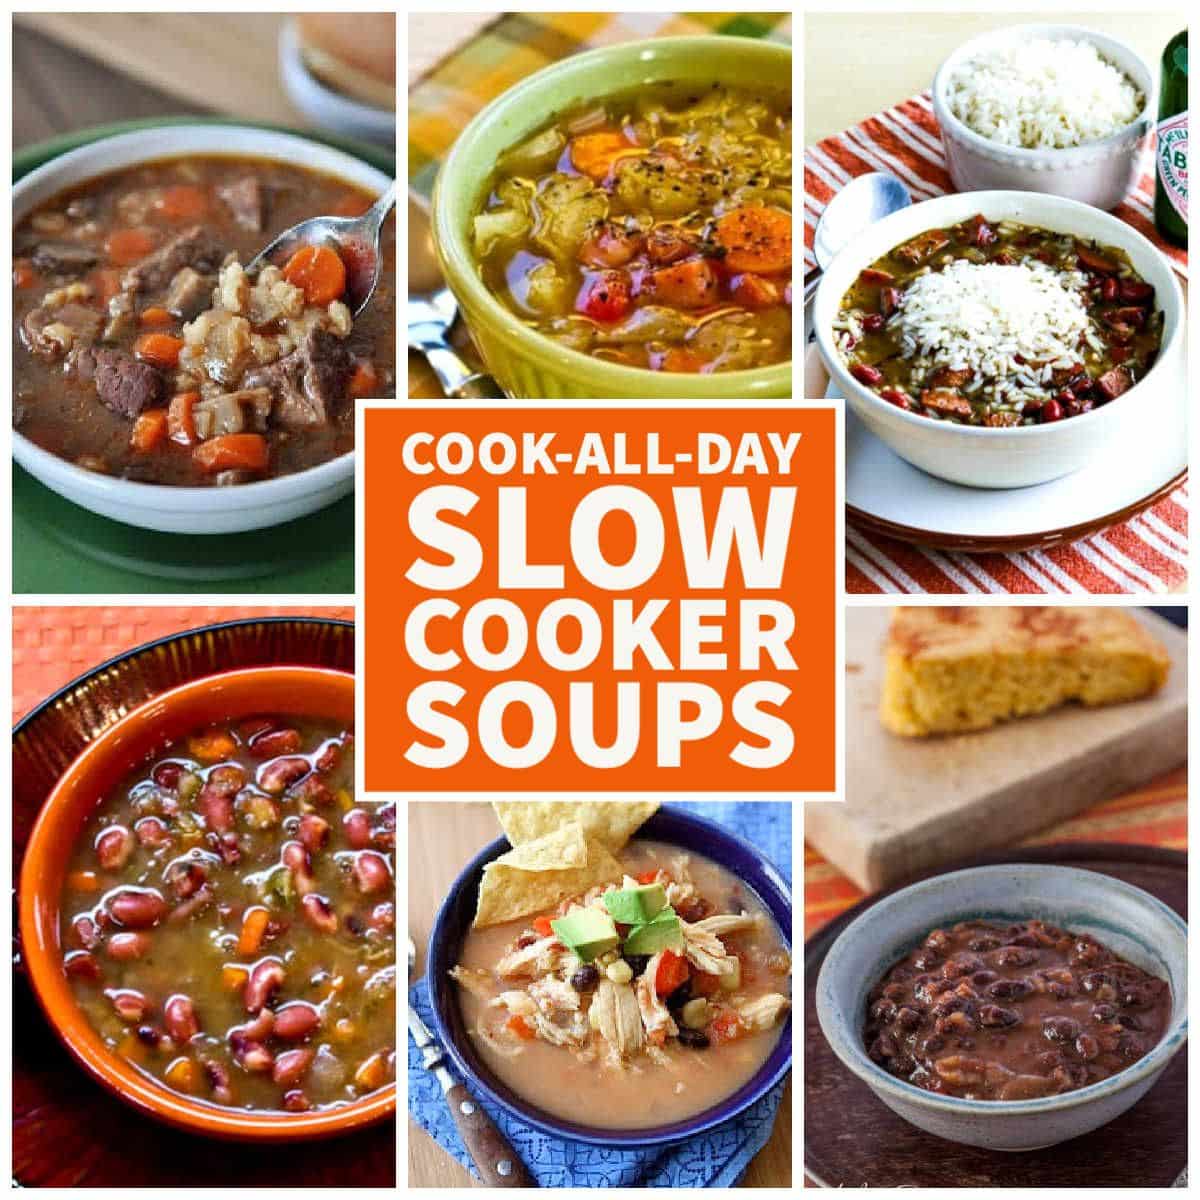 Cook-All-Day Slow Cooker Soups collage of featured recipes.